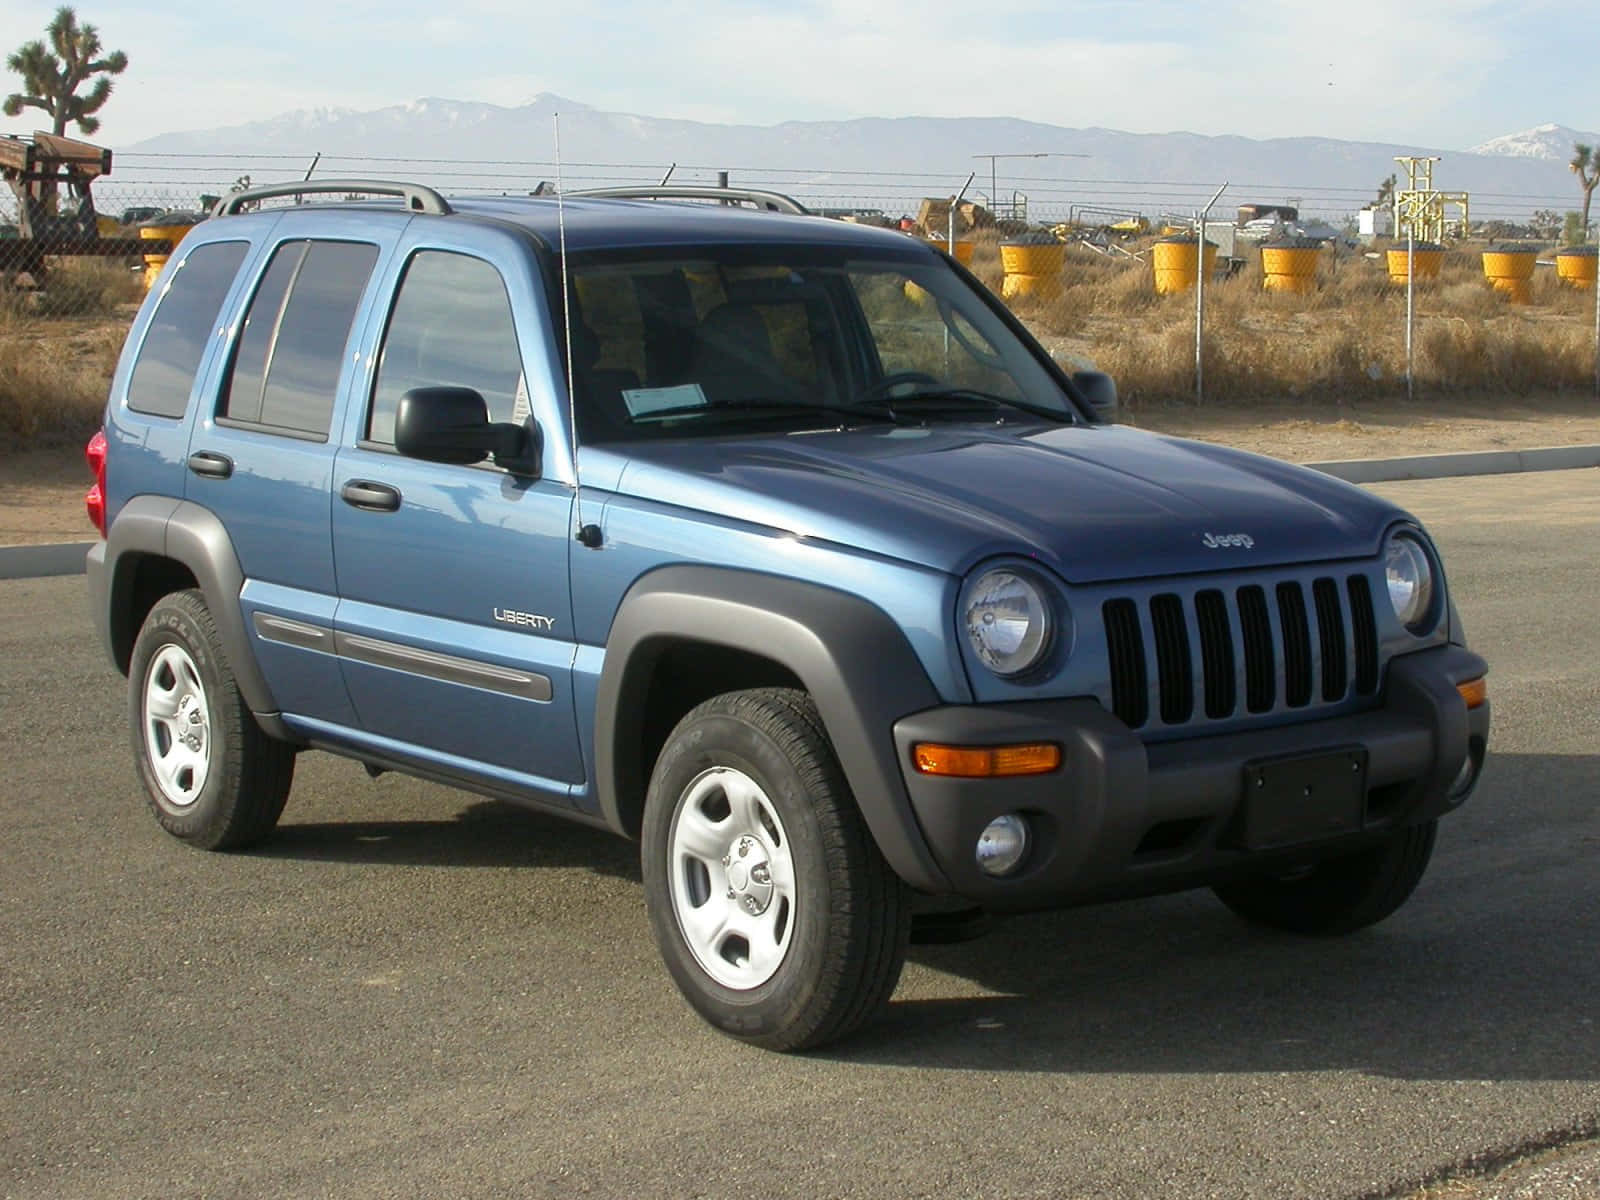 Jeep Liberty Dominating the Open Road Wallpaper